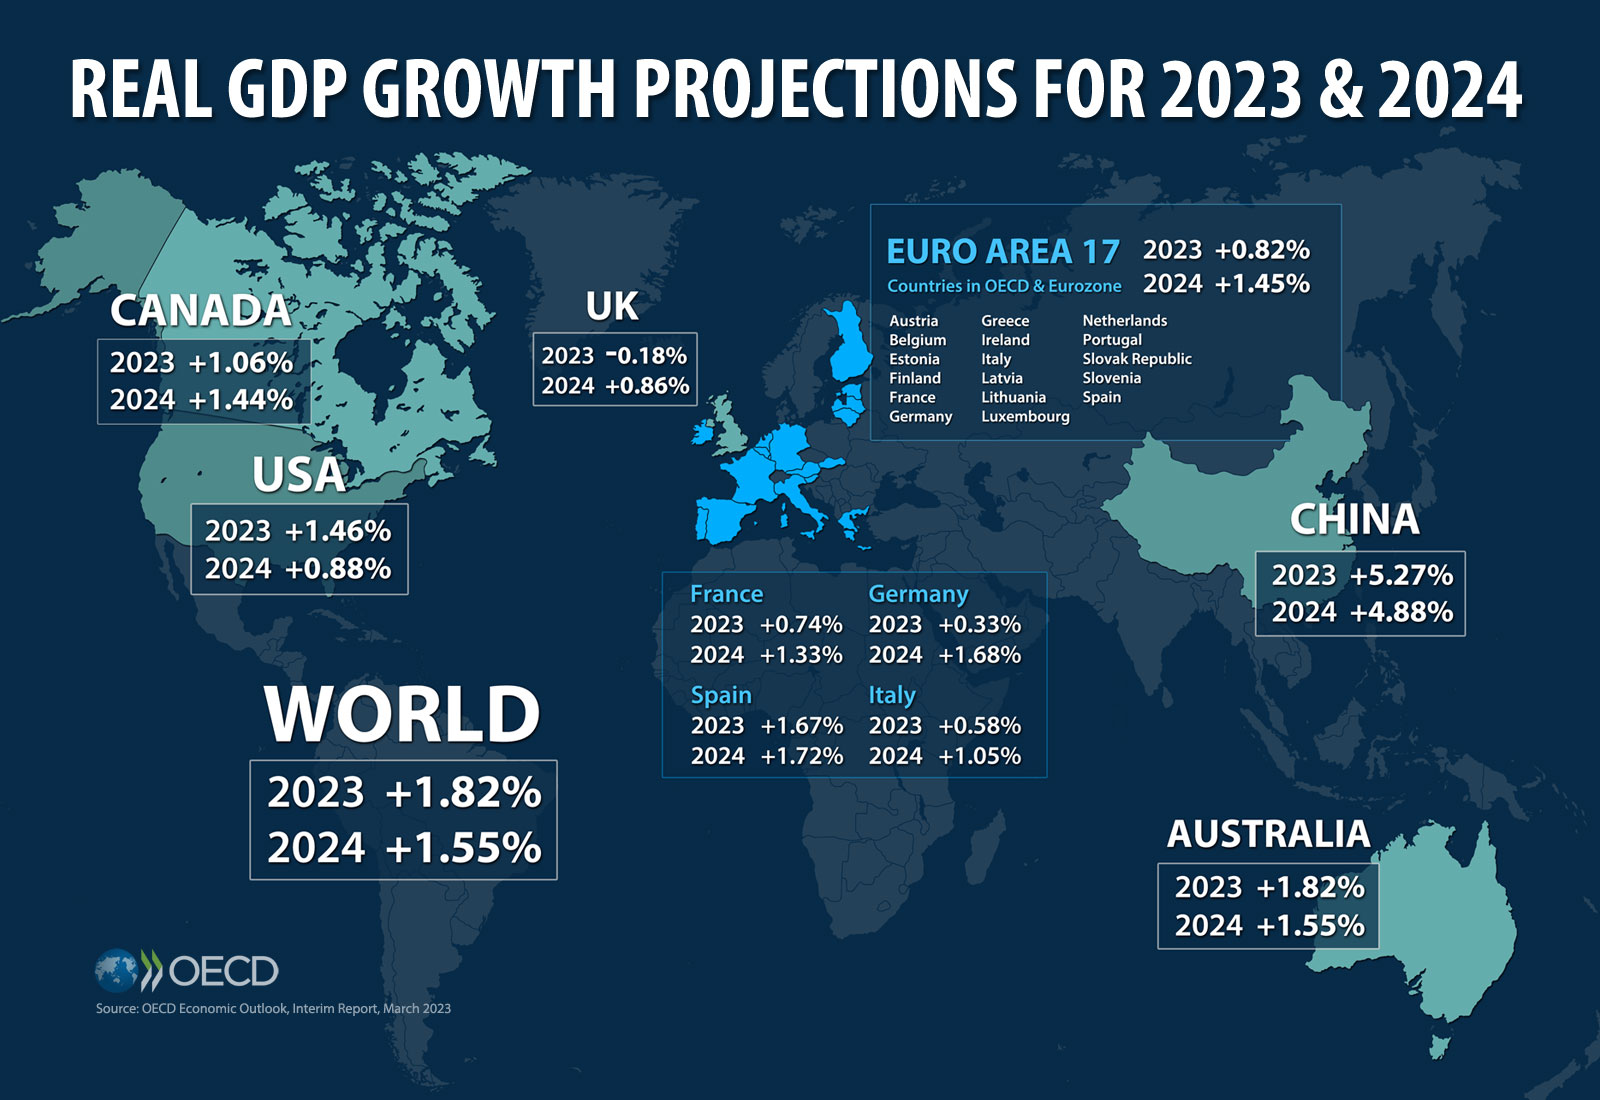 OECD GDP Projections for 2023 and 2024 - World Map showing selected national and Euro Area 17 projections